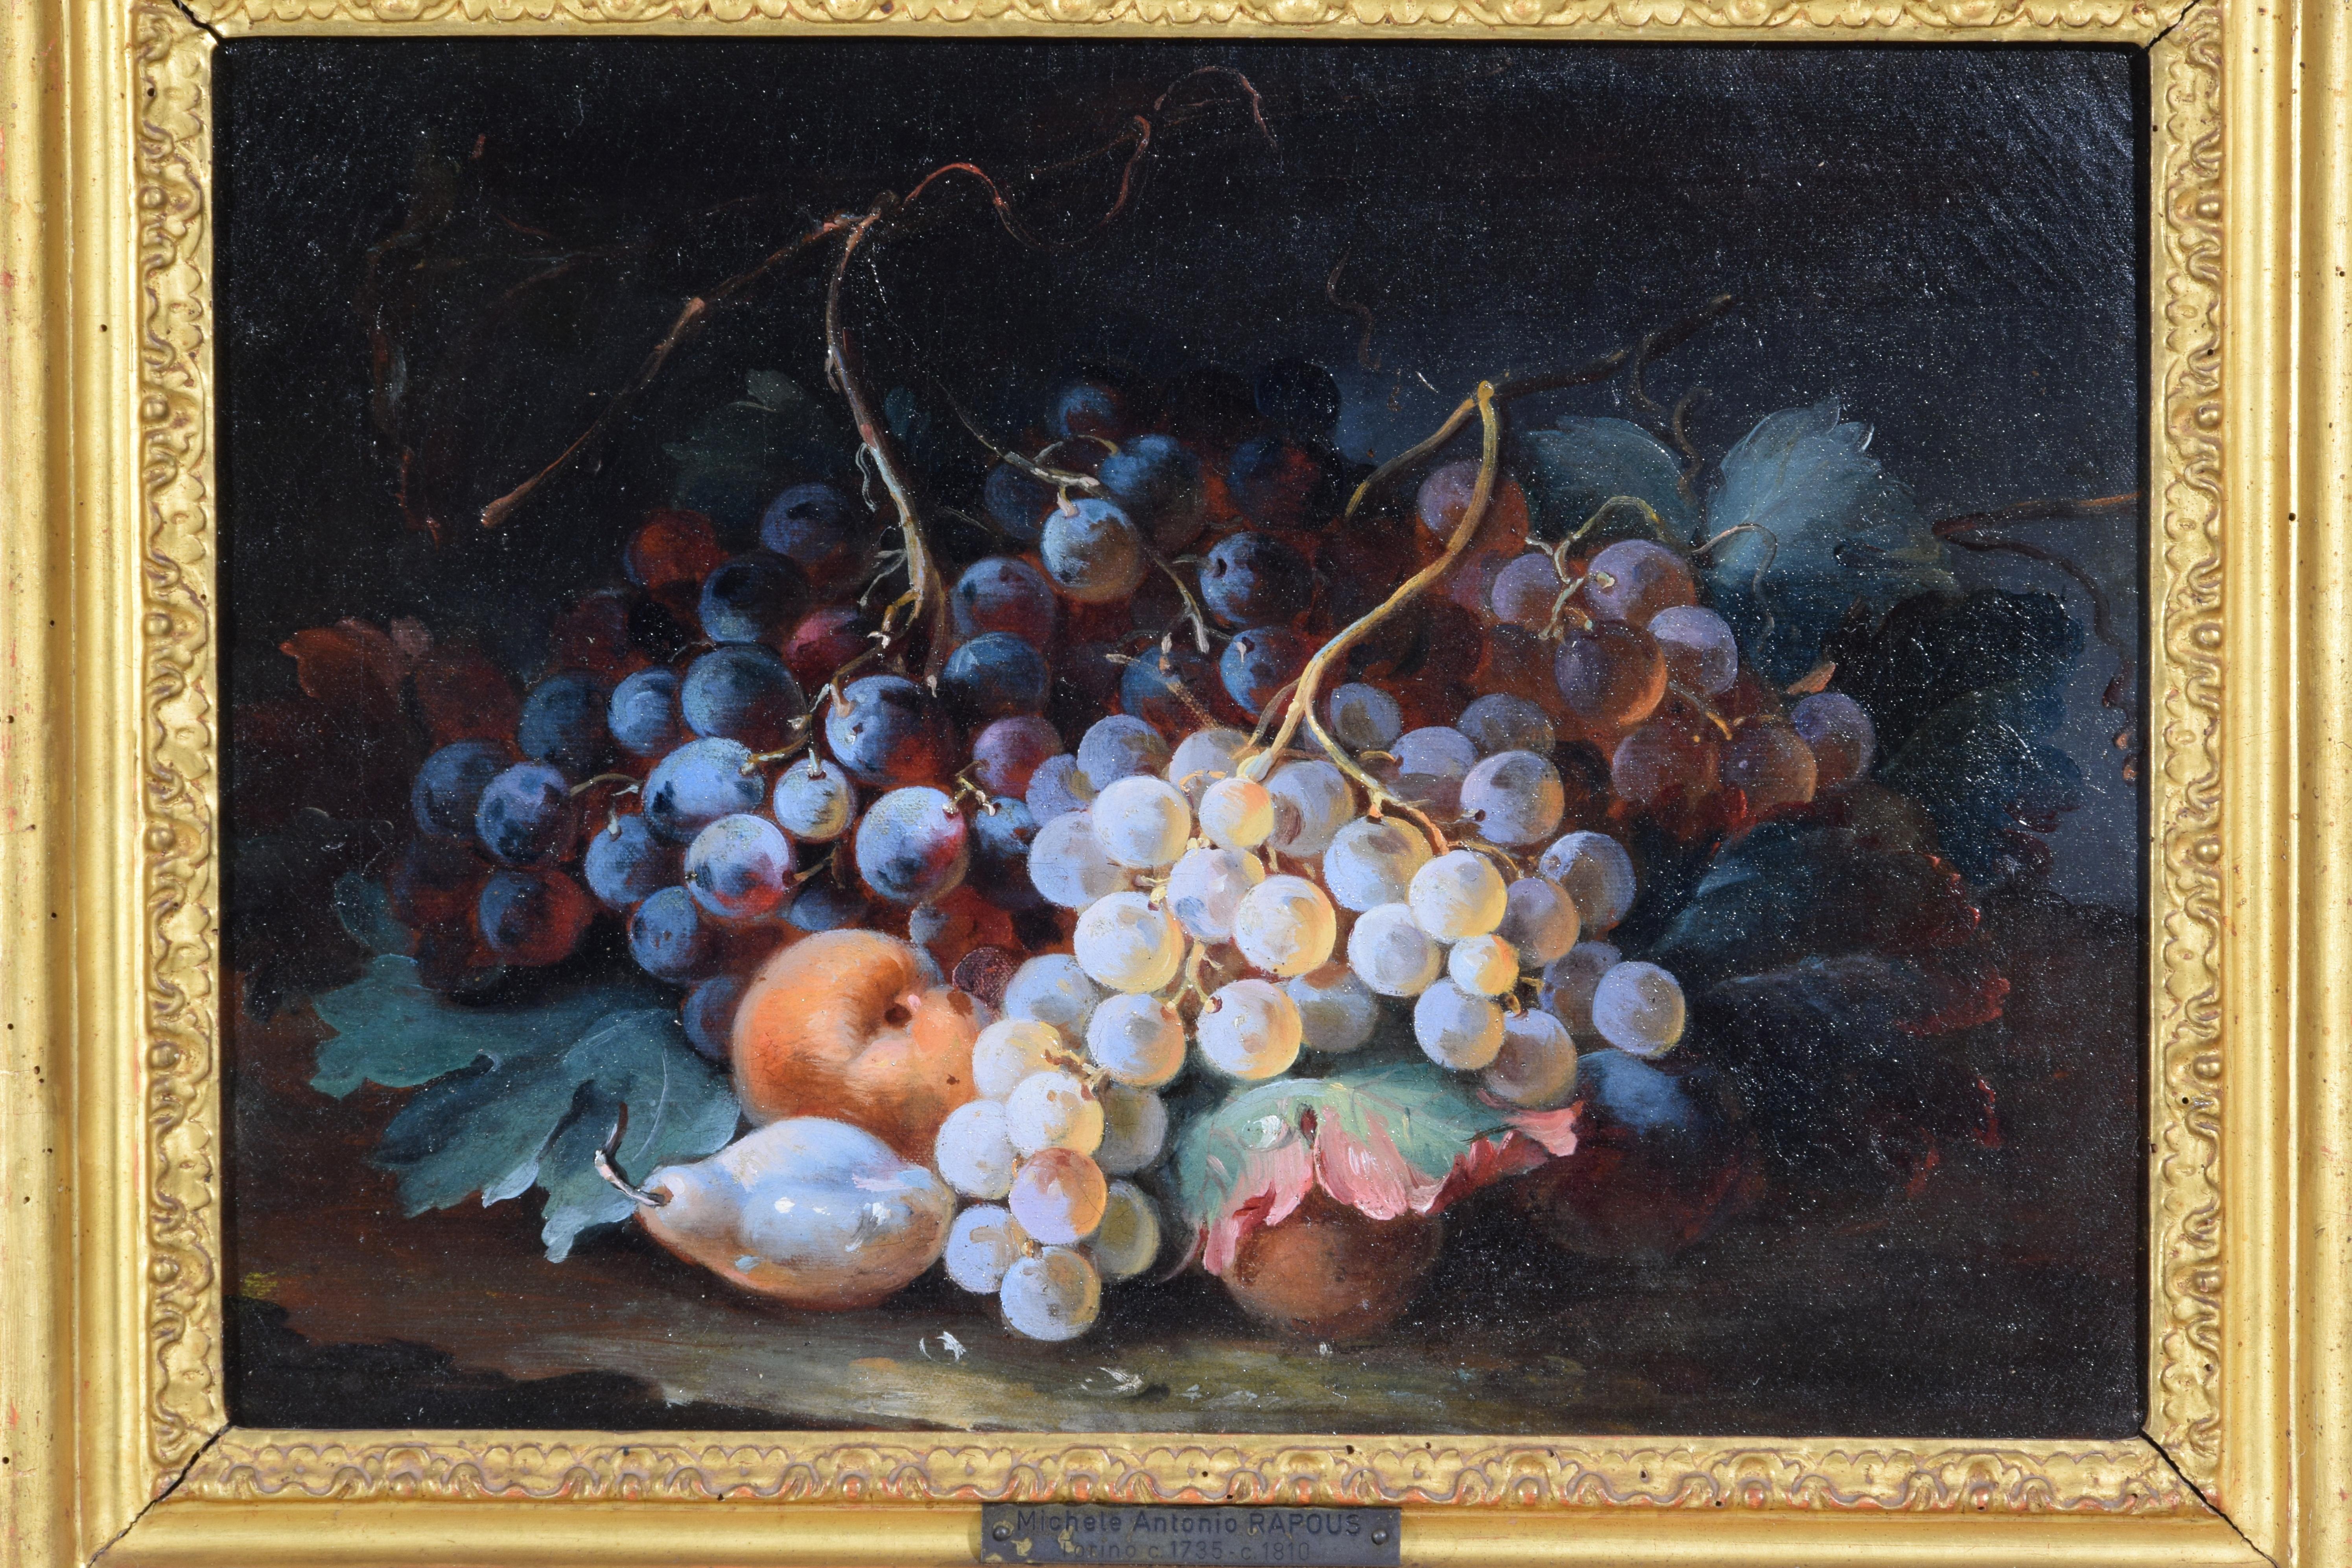 18th Century, Pair Italian Rococo Still Life Painting by Michele Antonio Rapous For Sale 13